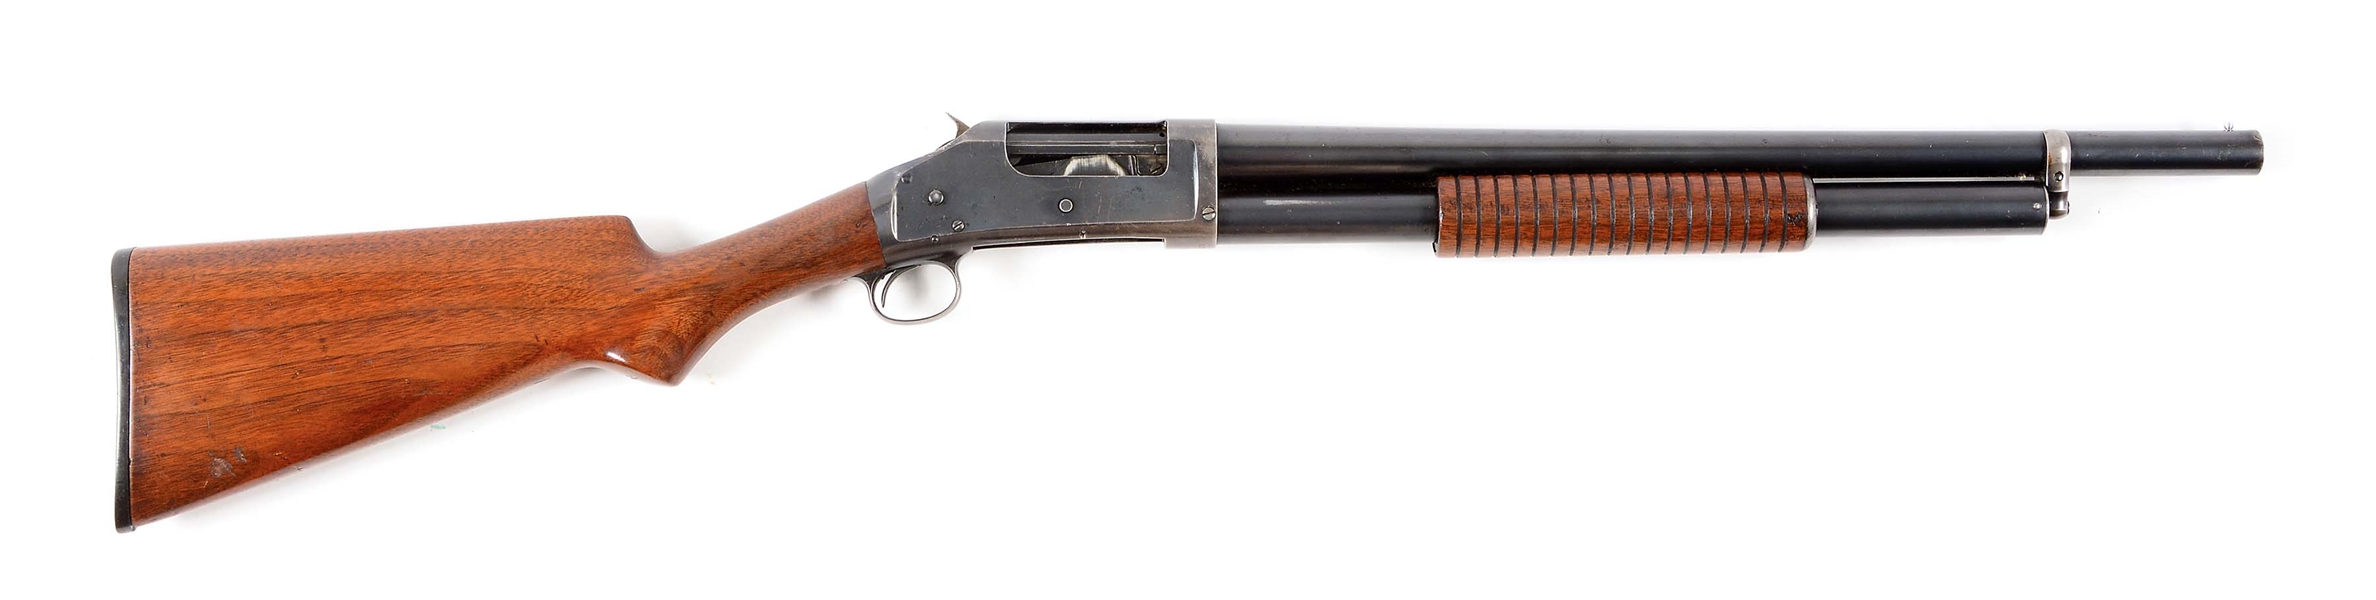 (C) VERY COOL WINCHESTER MODEL 1897 SHOTGUN - IDED MONTANA STATE PRISON (1911).